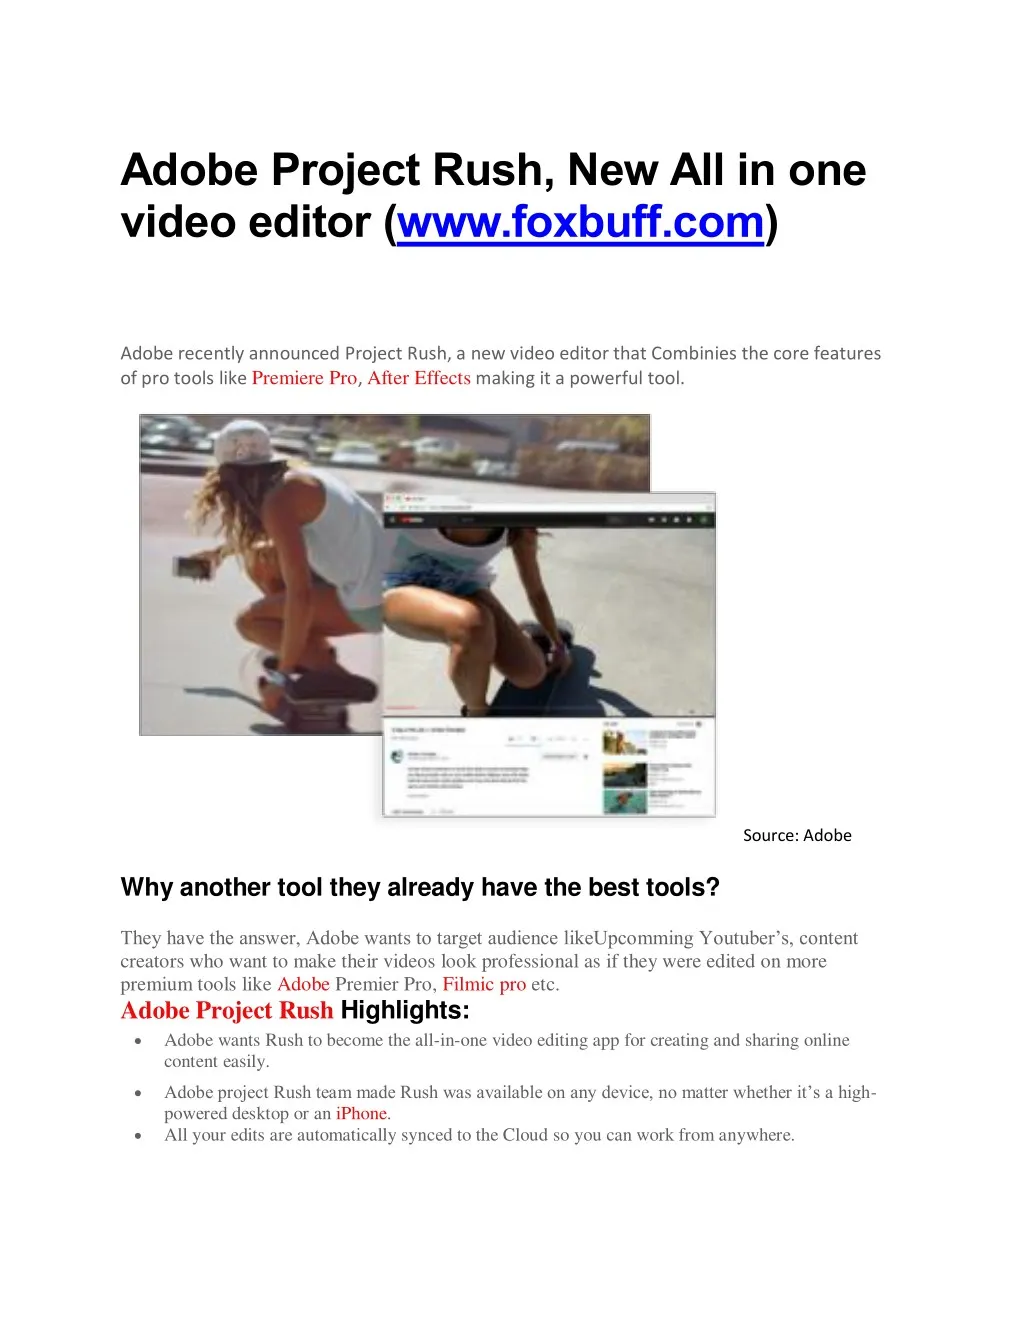 adobe project rush new all in one video editor